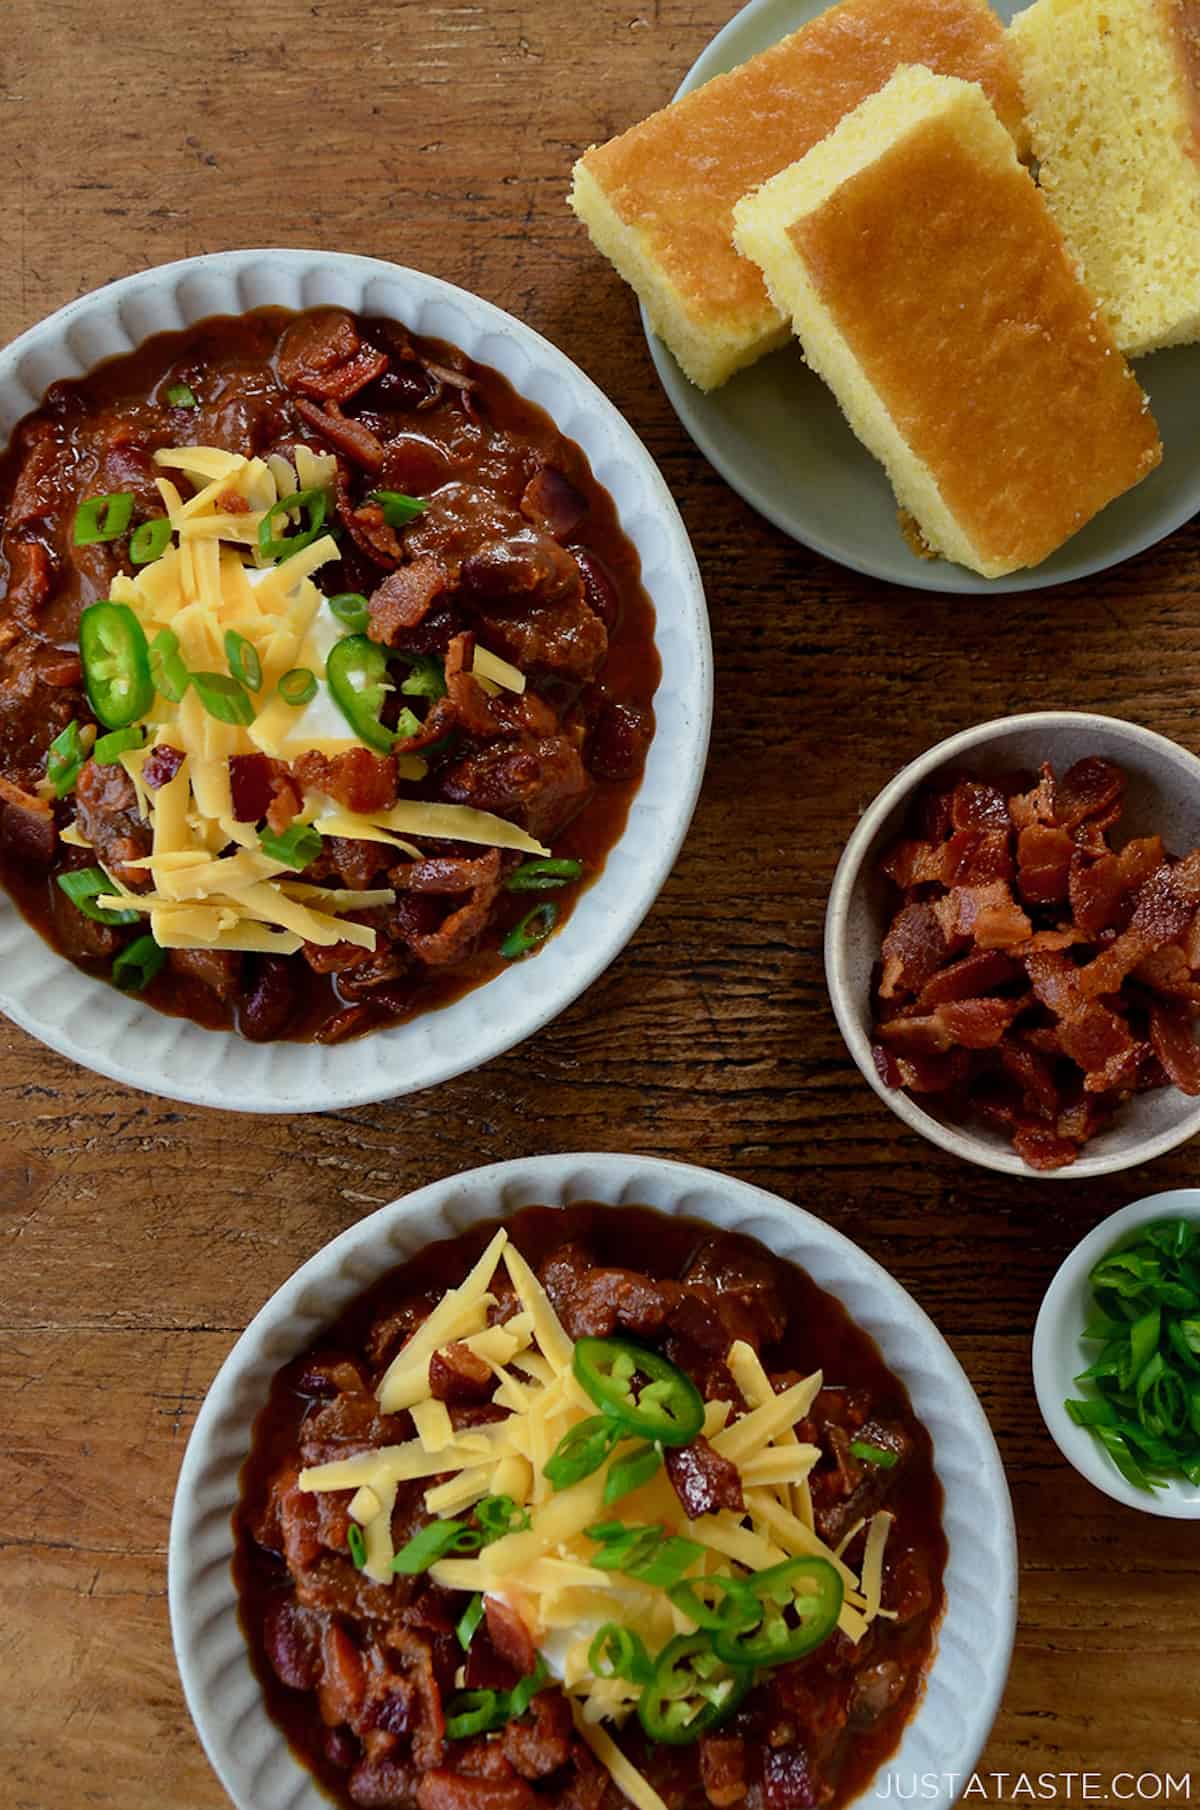 Two bowls of chili topped with sour cream, crumbled bits of bacon, grated cheese, jalapeno slices and thinly sliced scallions. A plate of cornbread and small bowls containing more bacon and scallions sit beside the bowls of chili.